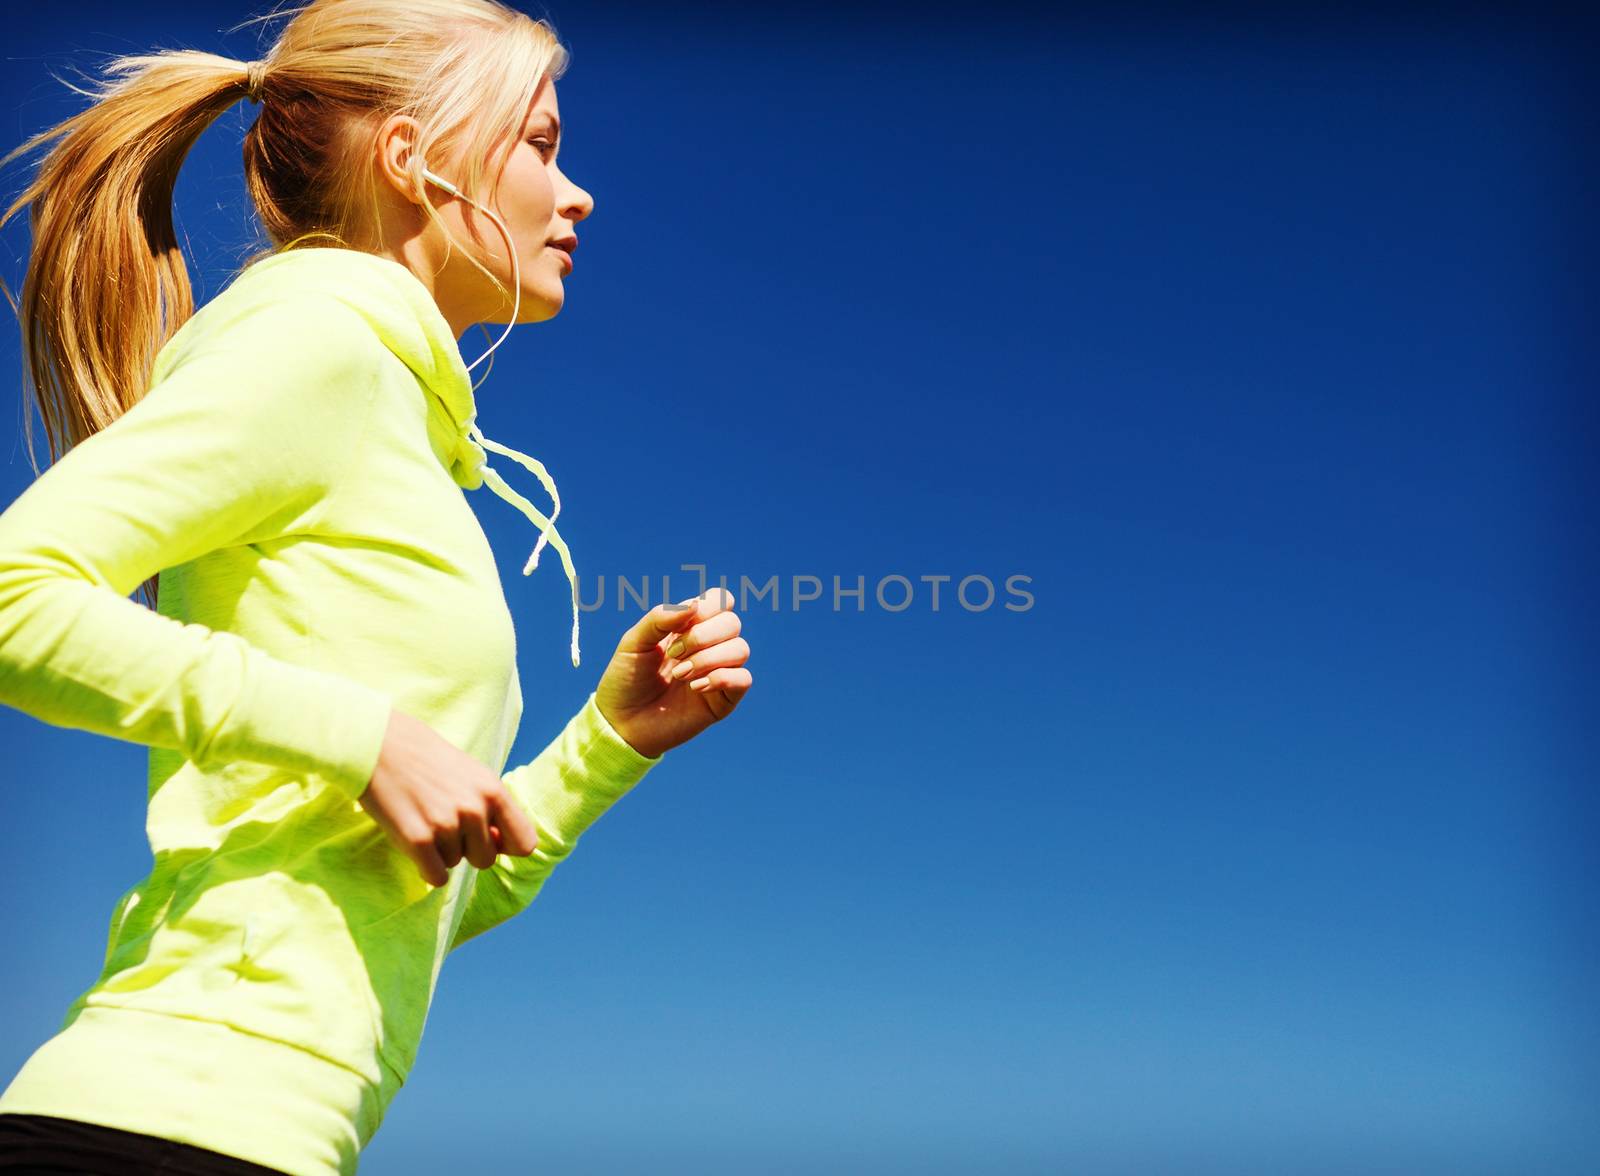 sport and lifestyle concept - woman doing running with earphones outdoors